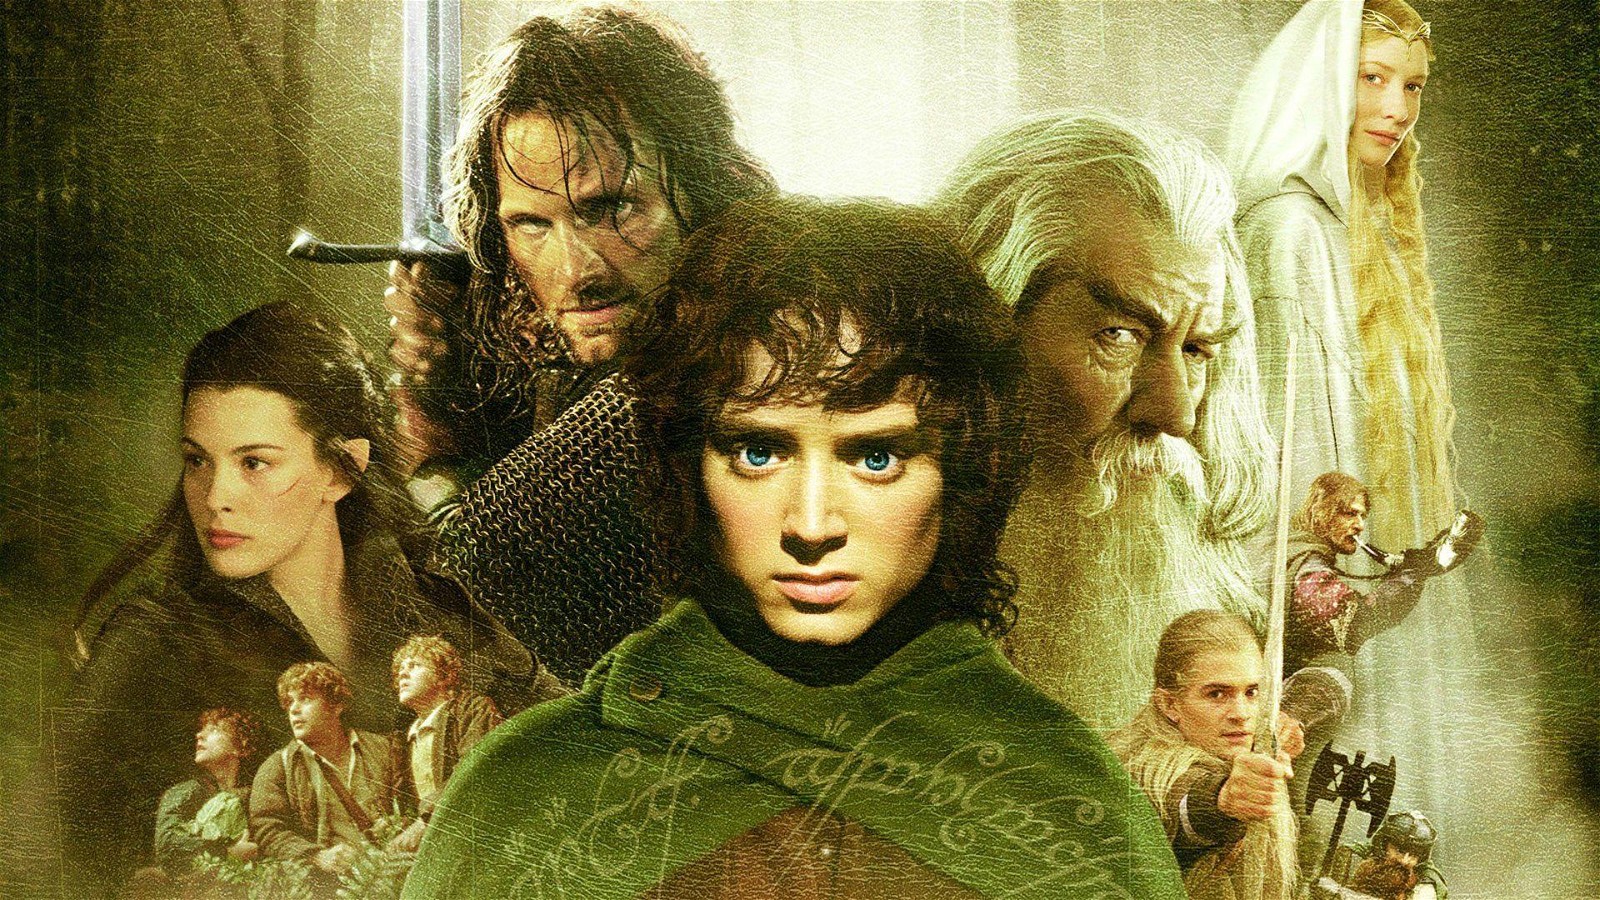 Lord of the Rings Film Franchise